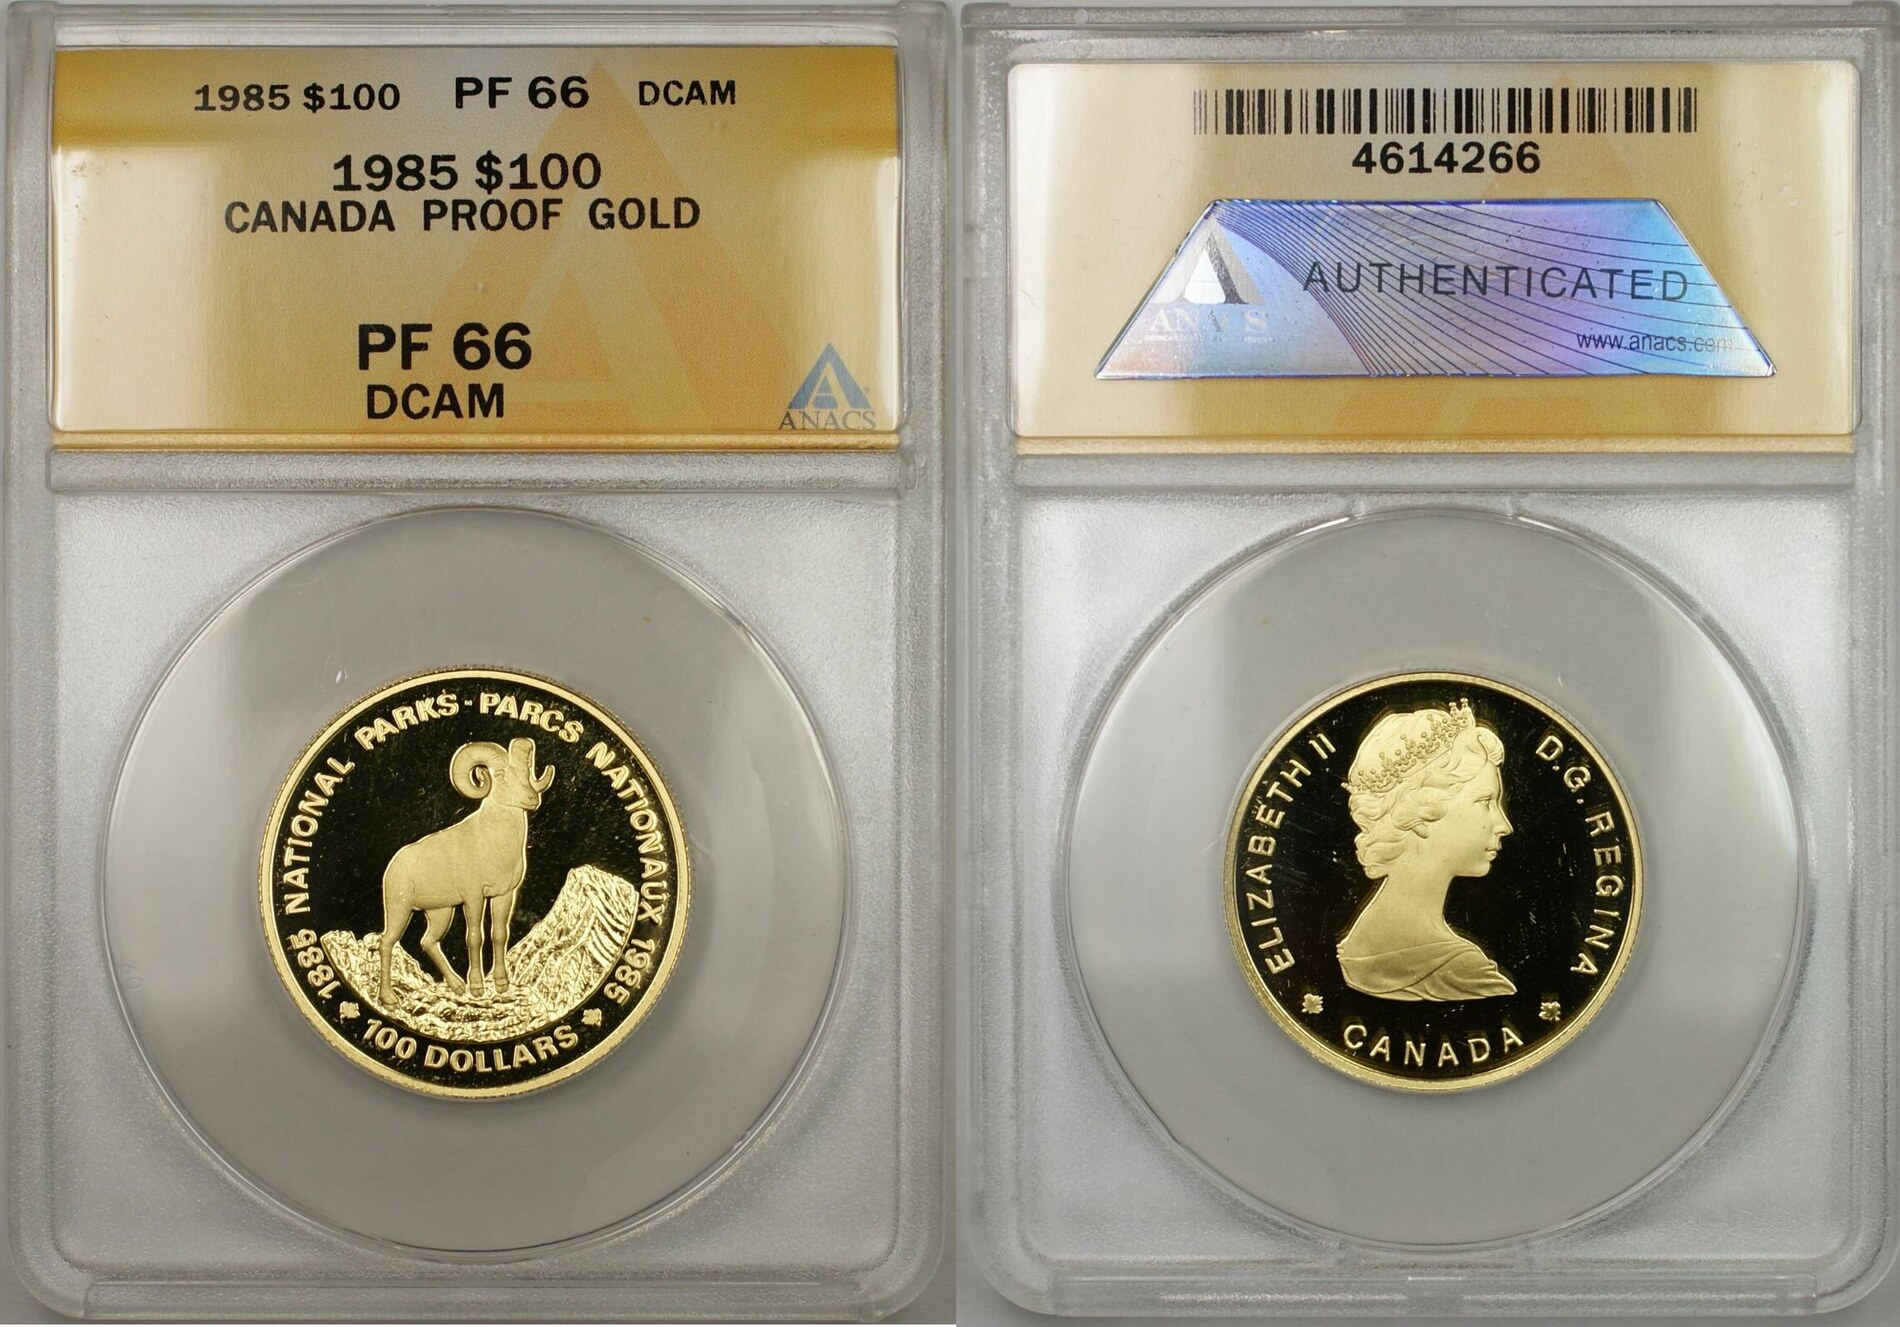 AMT 1985 Proof Canada National Parks 1/2 Oz Gold Coin 100 $ pièce PF-66 DCAM 